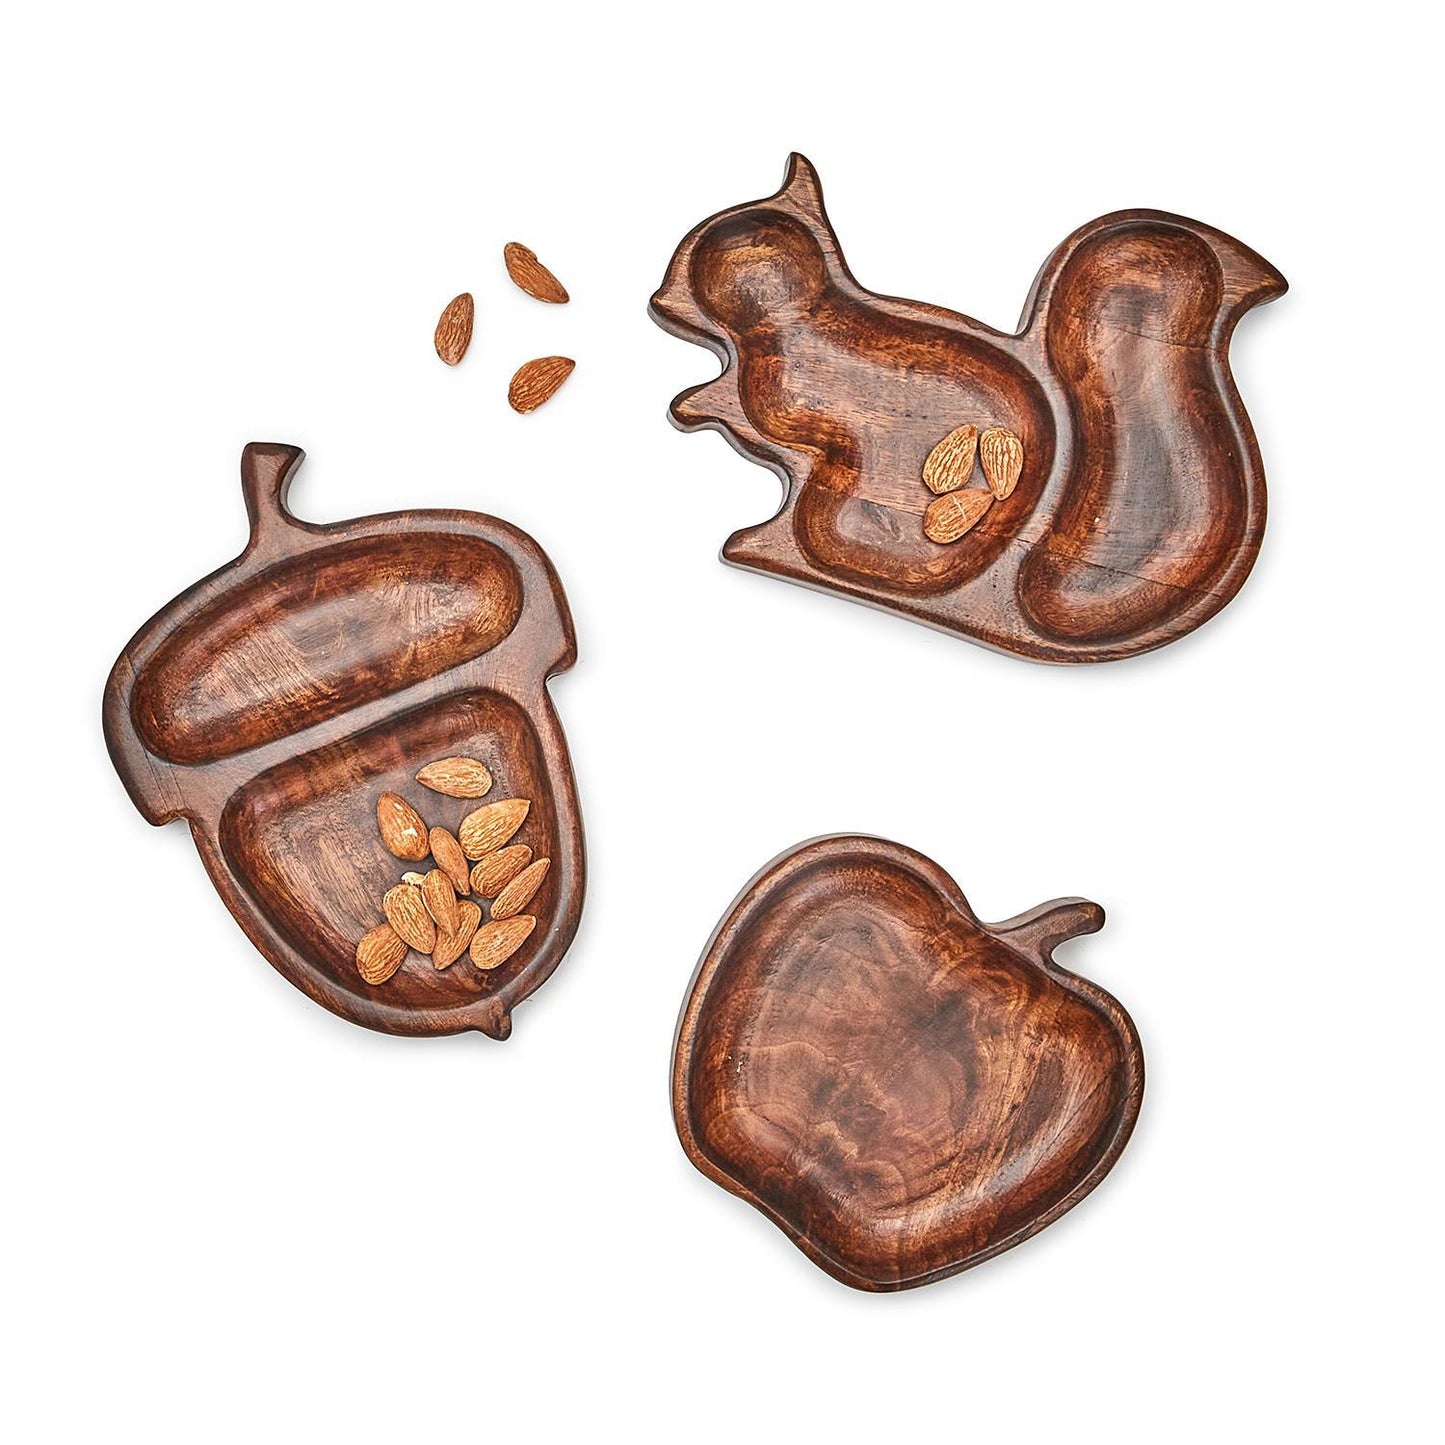 Two's Autumn Soiree Set of 3 Hand-Crafted Bowl / Charcuterie Boards in 3 Designs